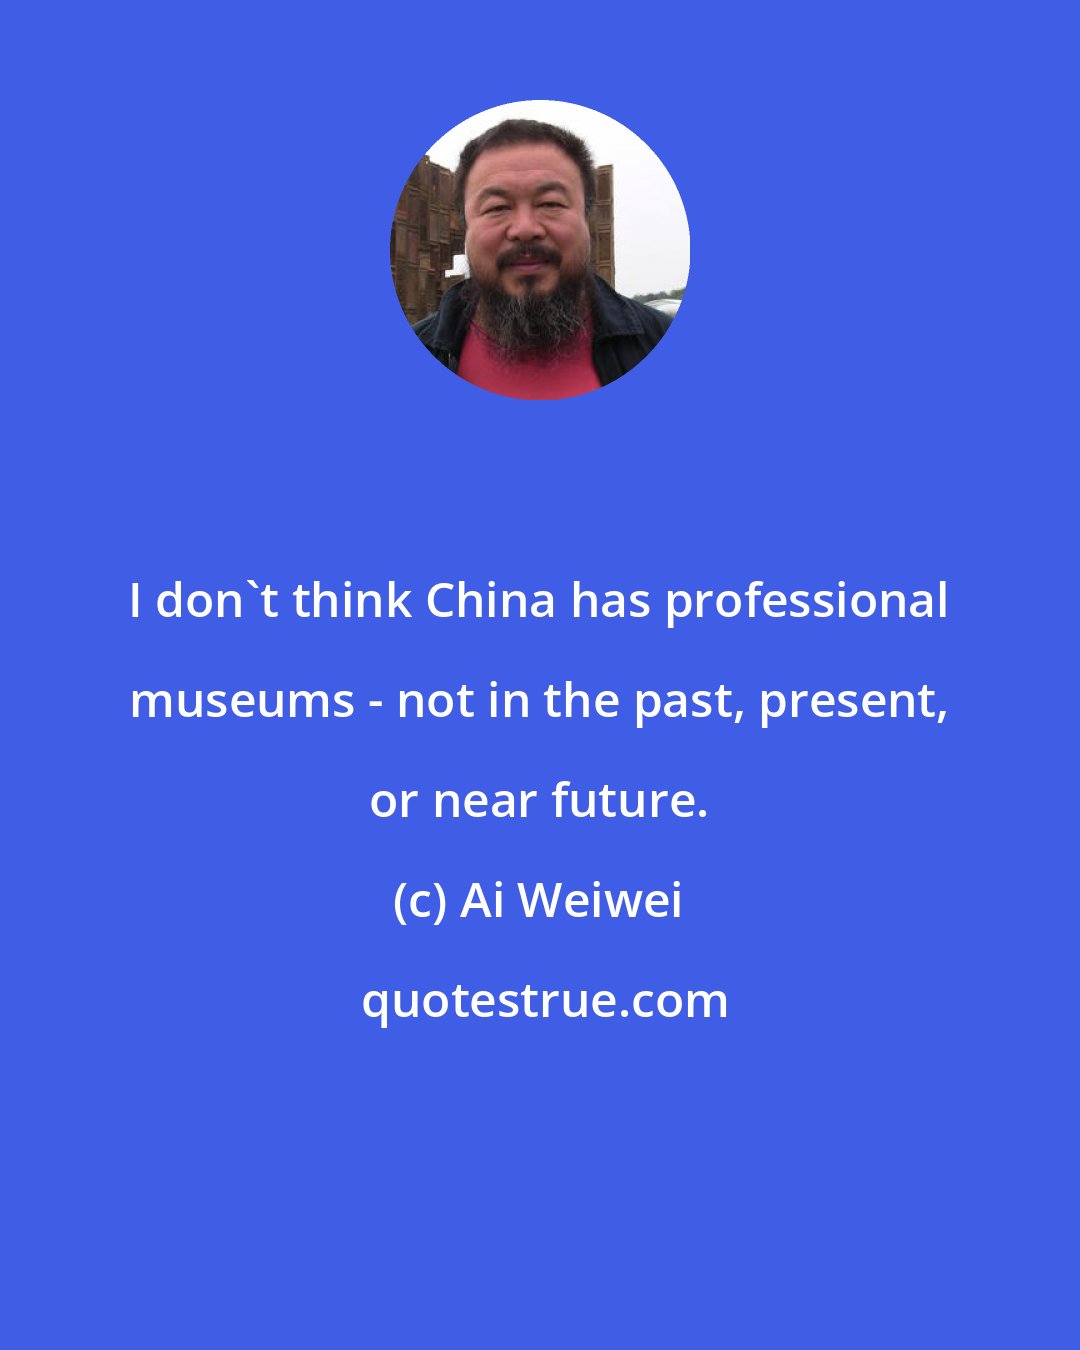 Ai Weiwei: I don't think China has professional museums - not in the past, present, or near future.